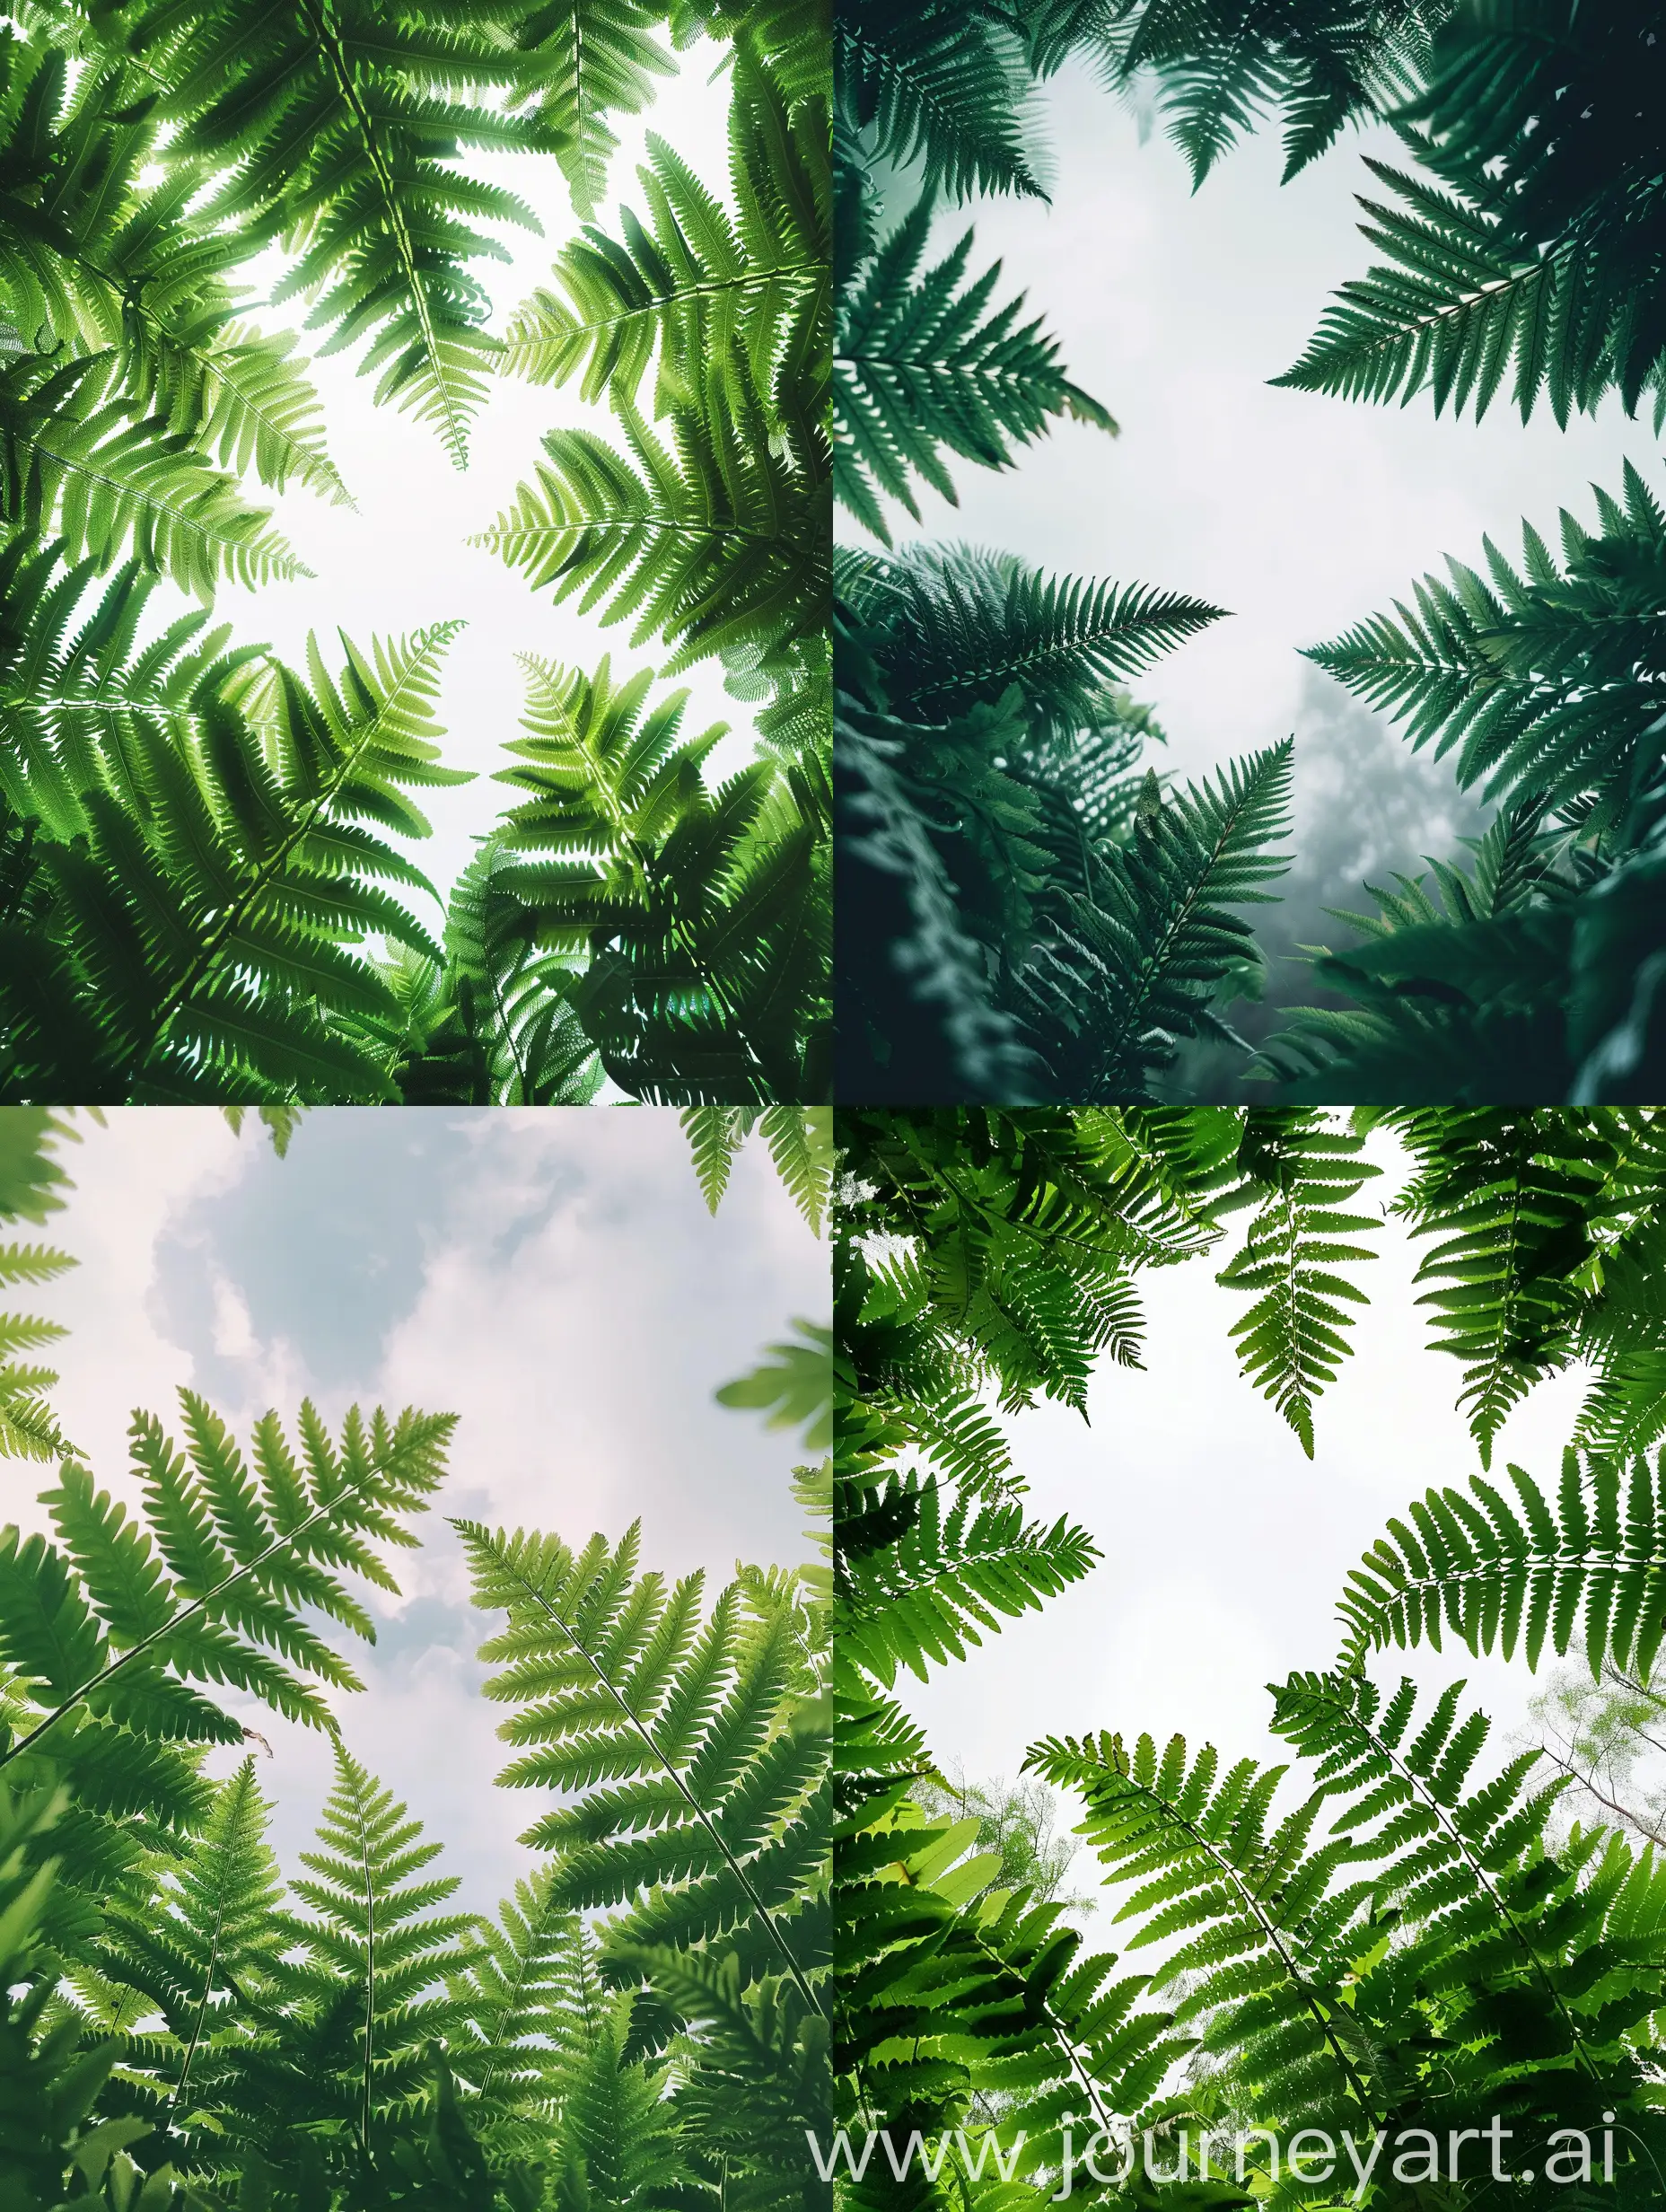 natural light, nature, photo, smooth, details, leaf, a lot of ferns, focus, lighted background, cold feelings, happiness, innocence, white sky, sky background, shot from below